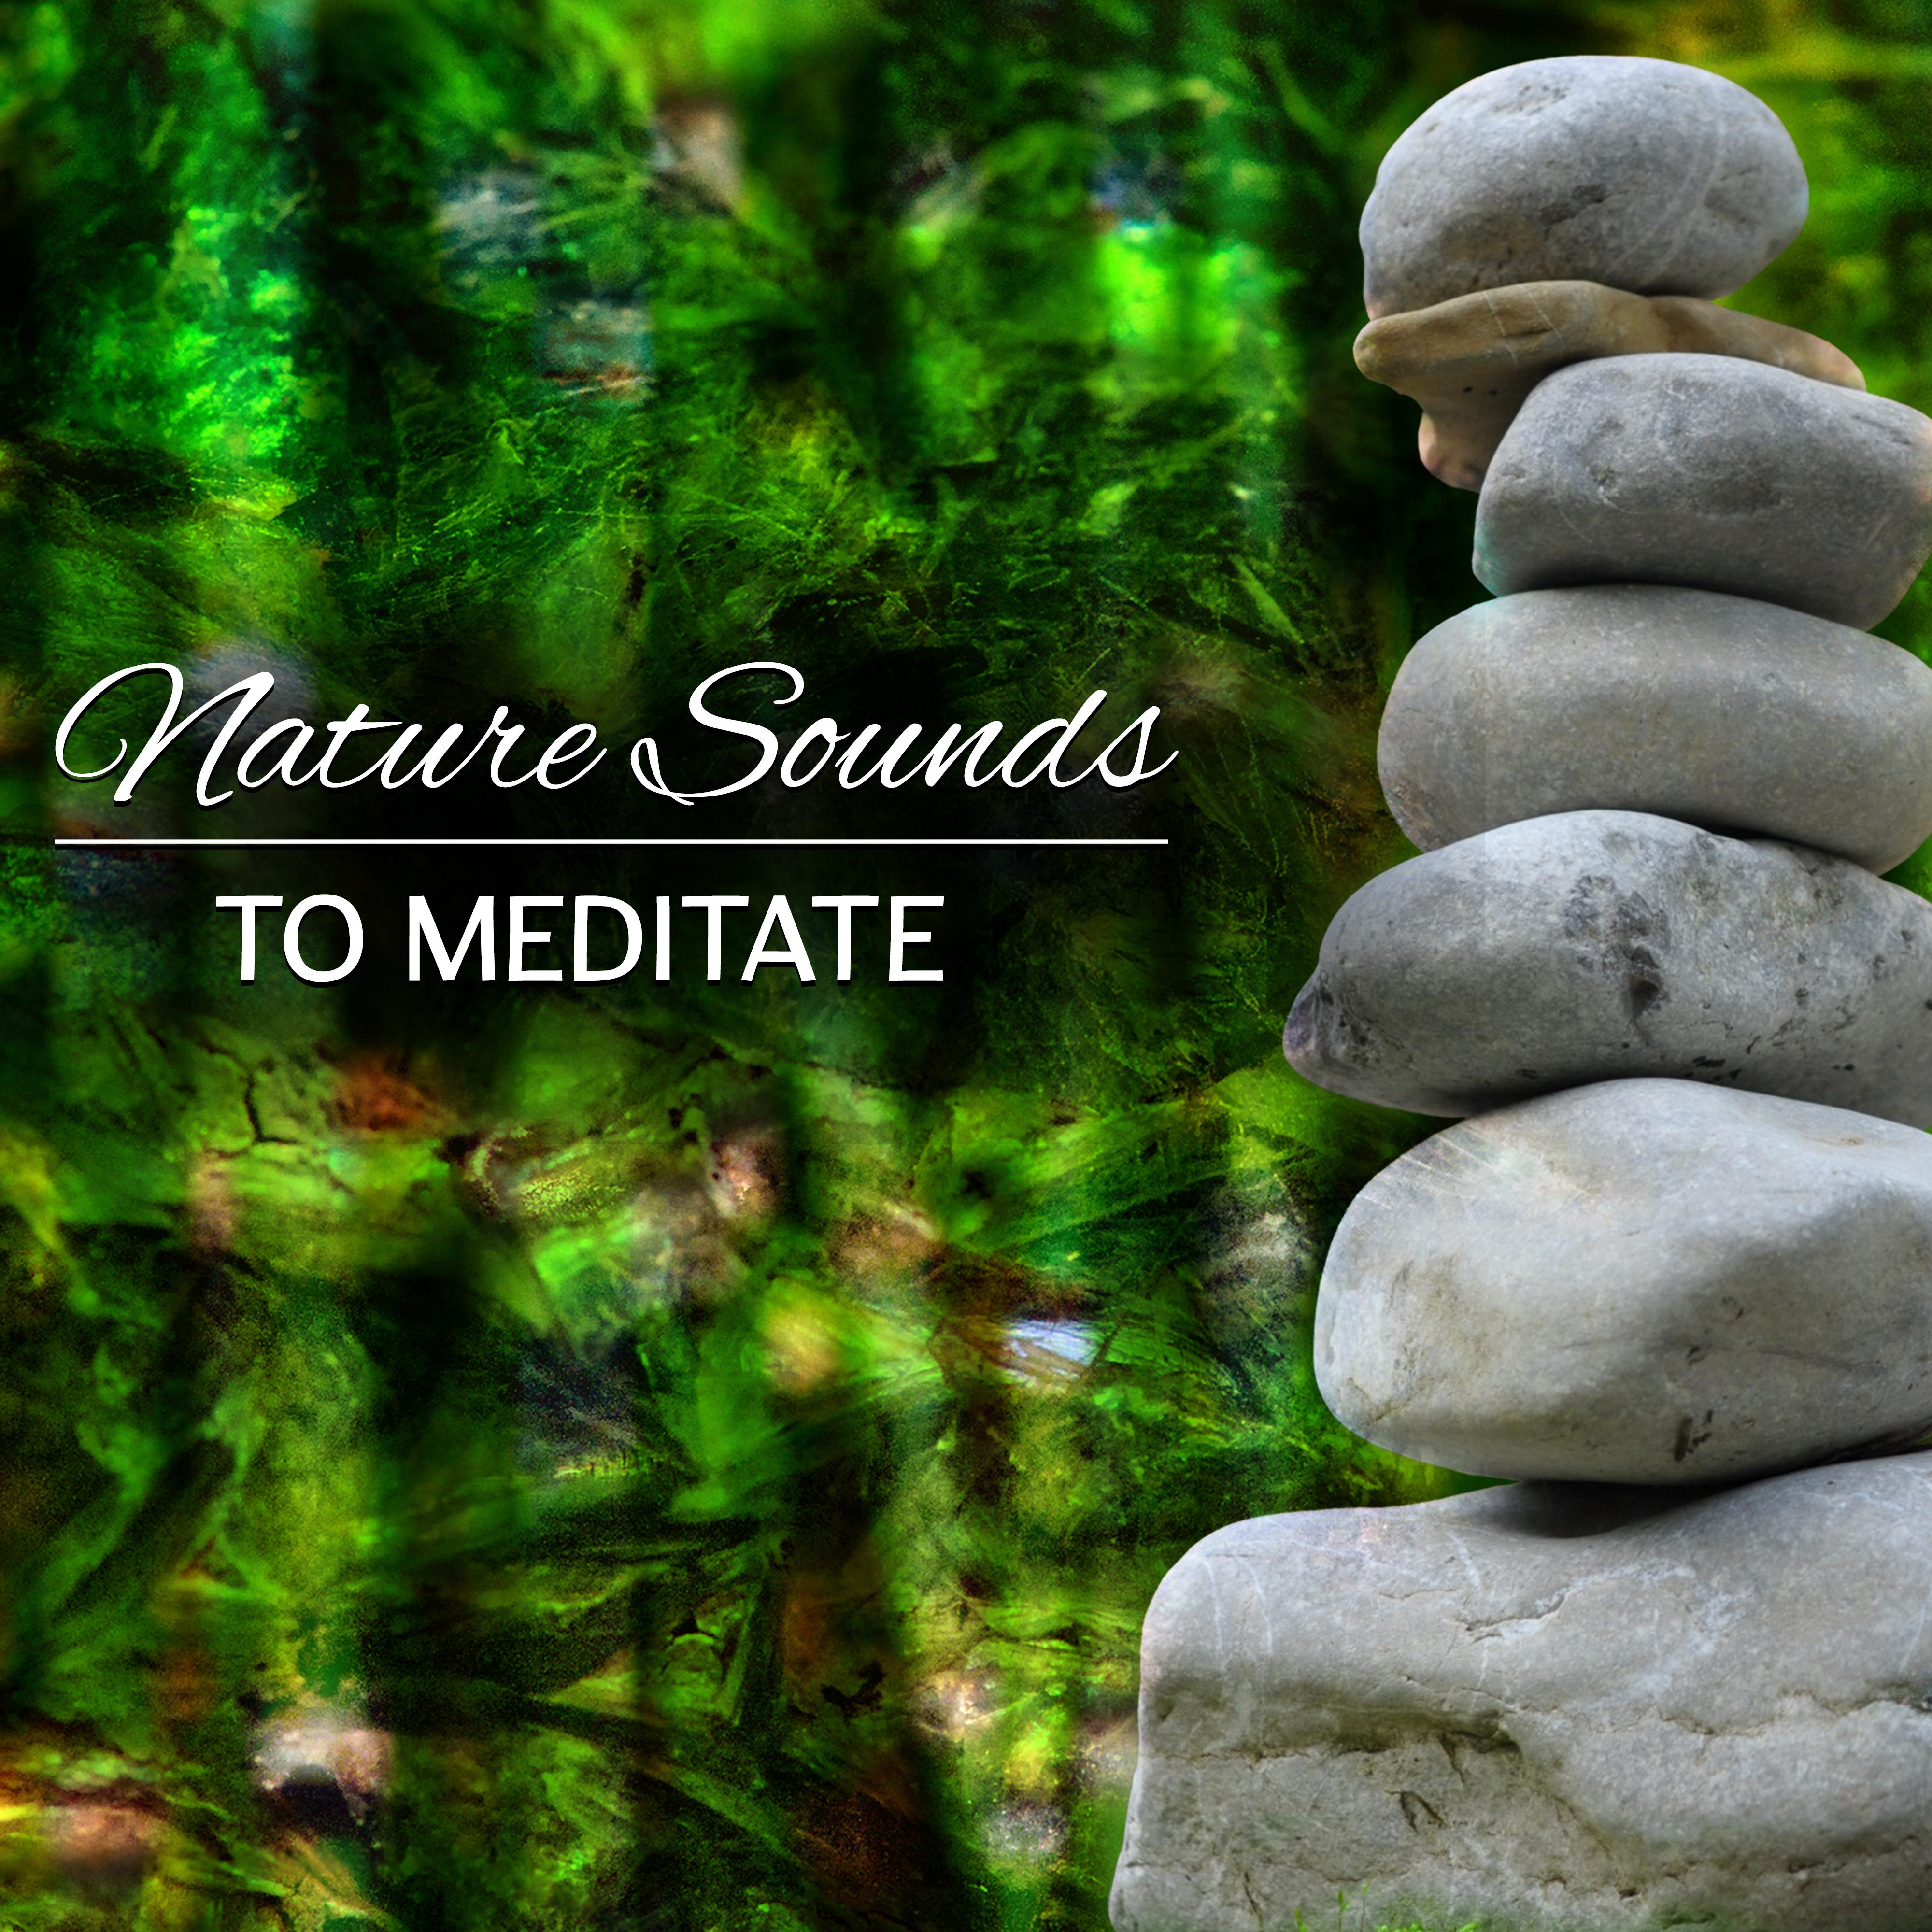 Nature Sounds to Meditate – Soothing Waves of Calmness, Time to Meditate, Soul Harmony, Spirit Journey